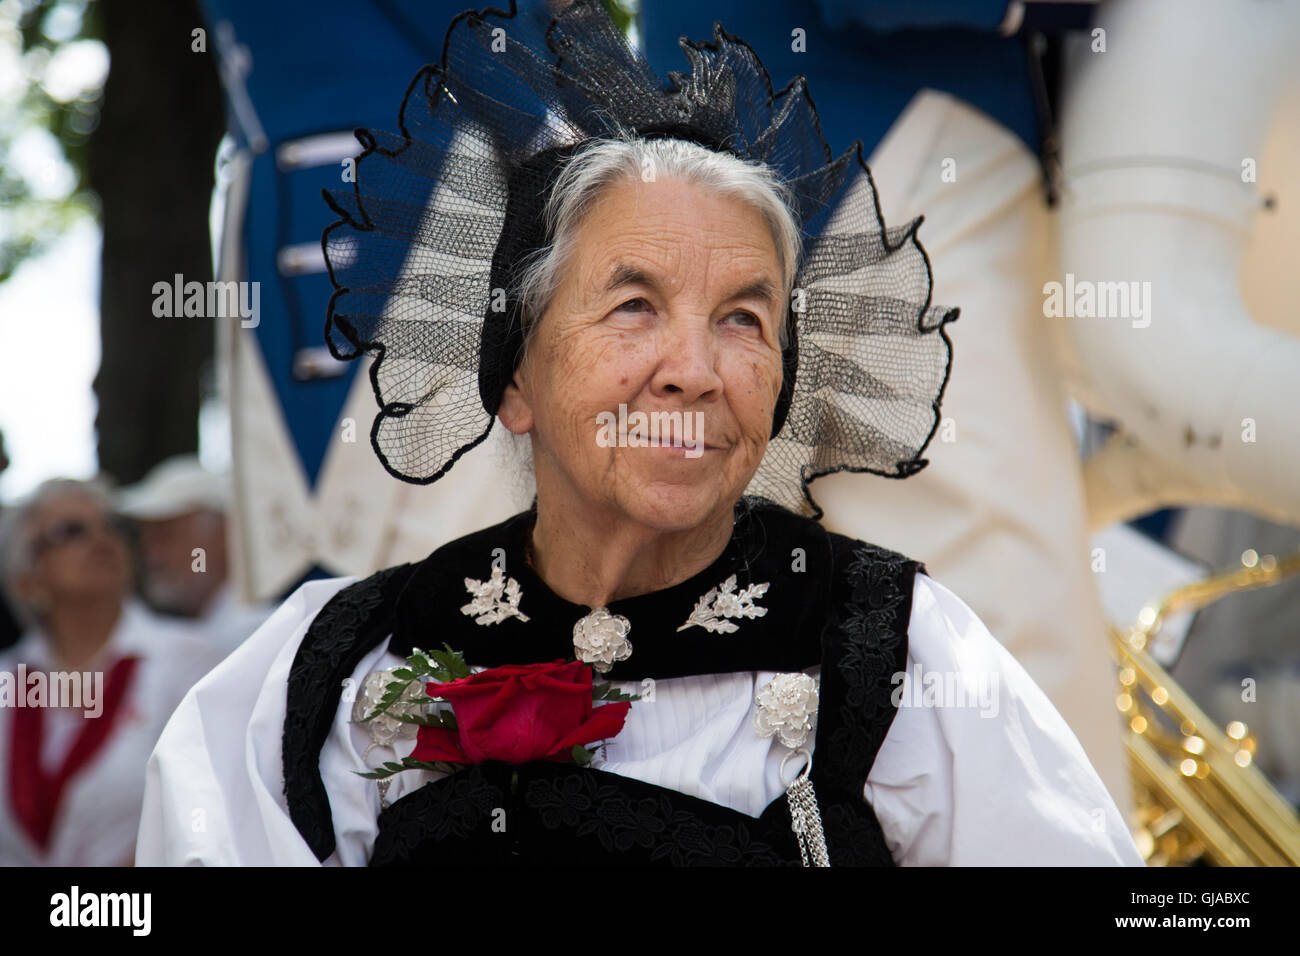 A woman wears traditional dress at a ceremony in Zurich in celebration of Swiss National Day. Stock Photo